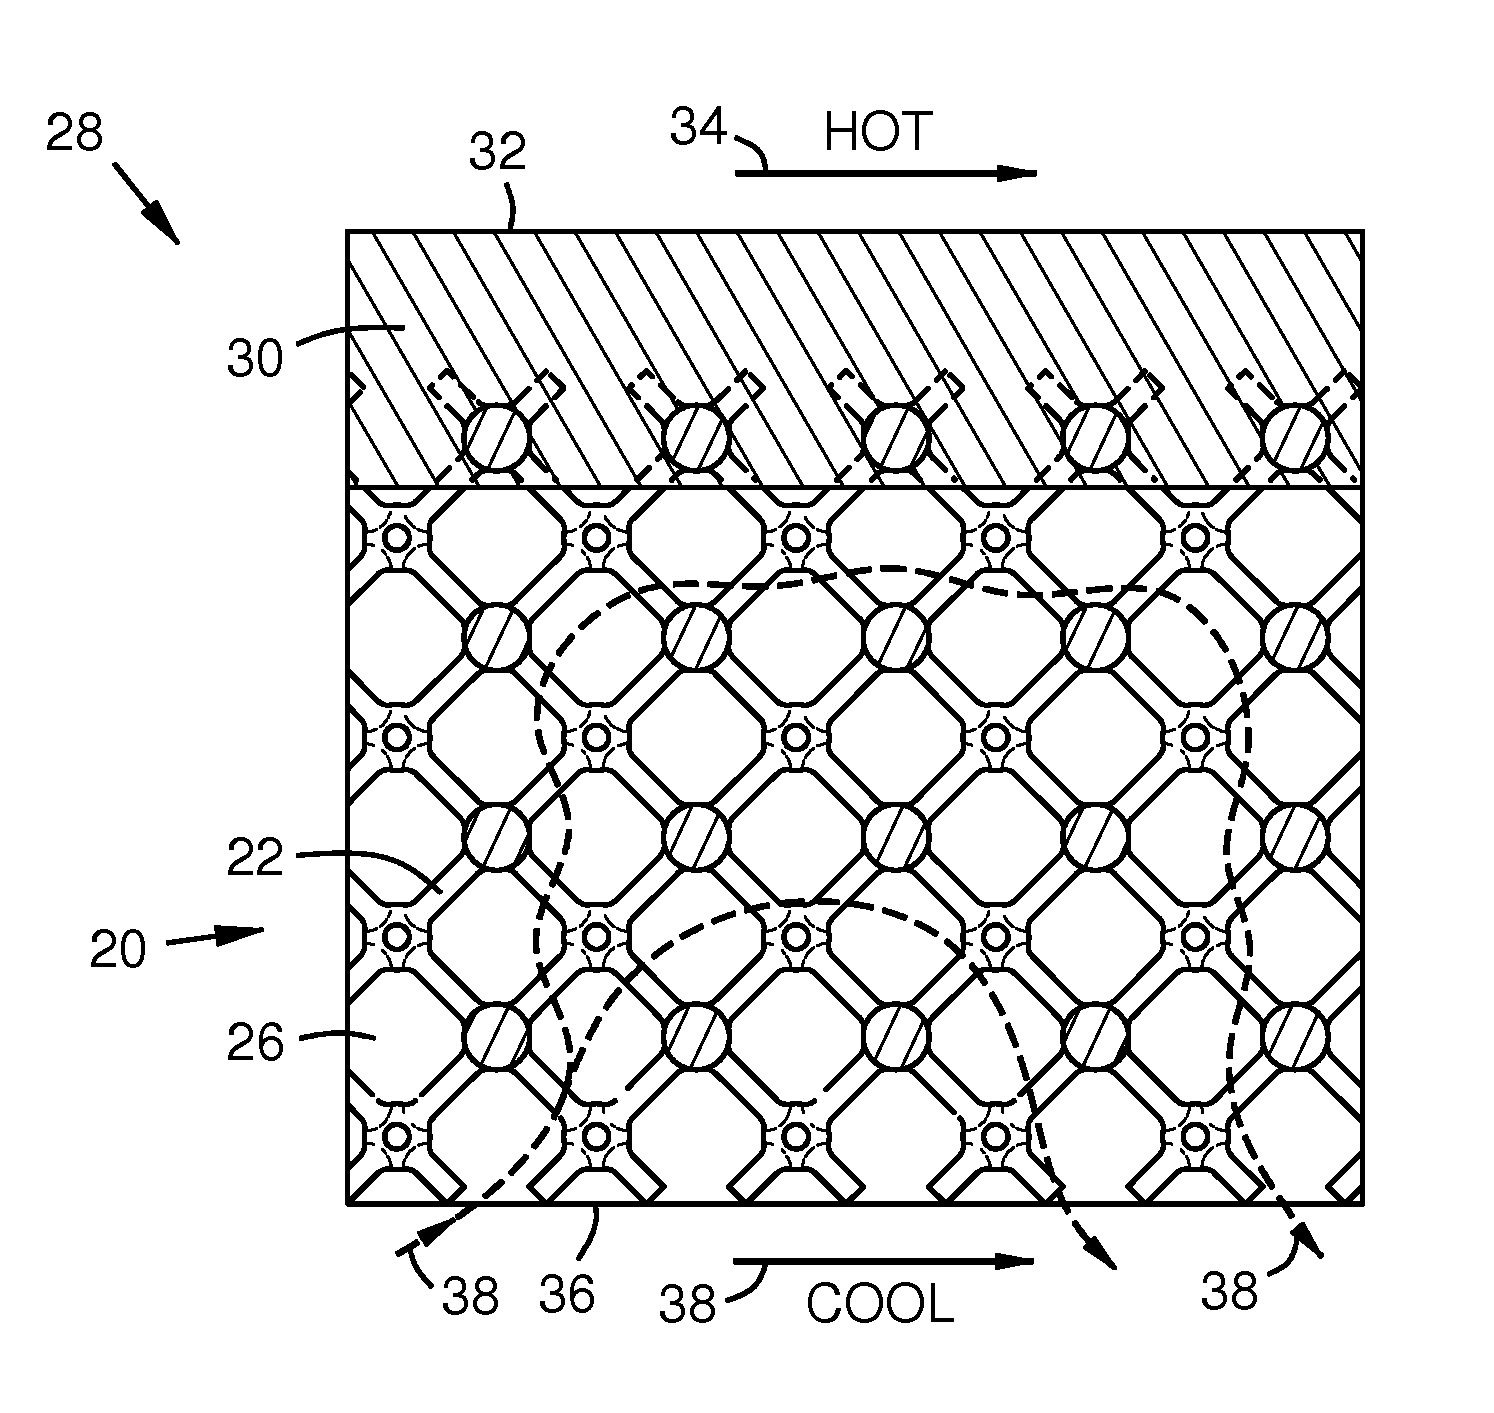 Process for making a wall with a porous element for component cooling